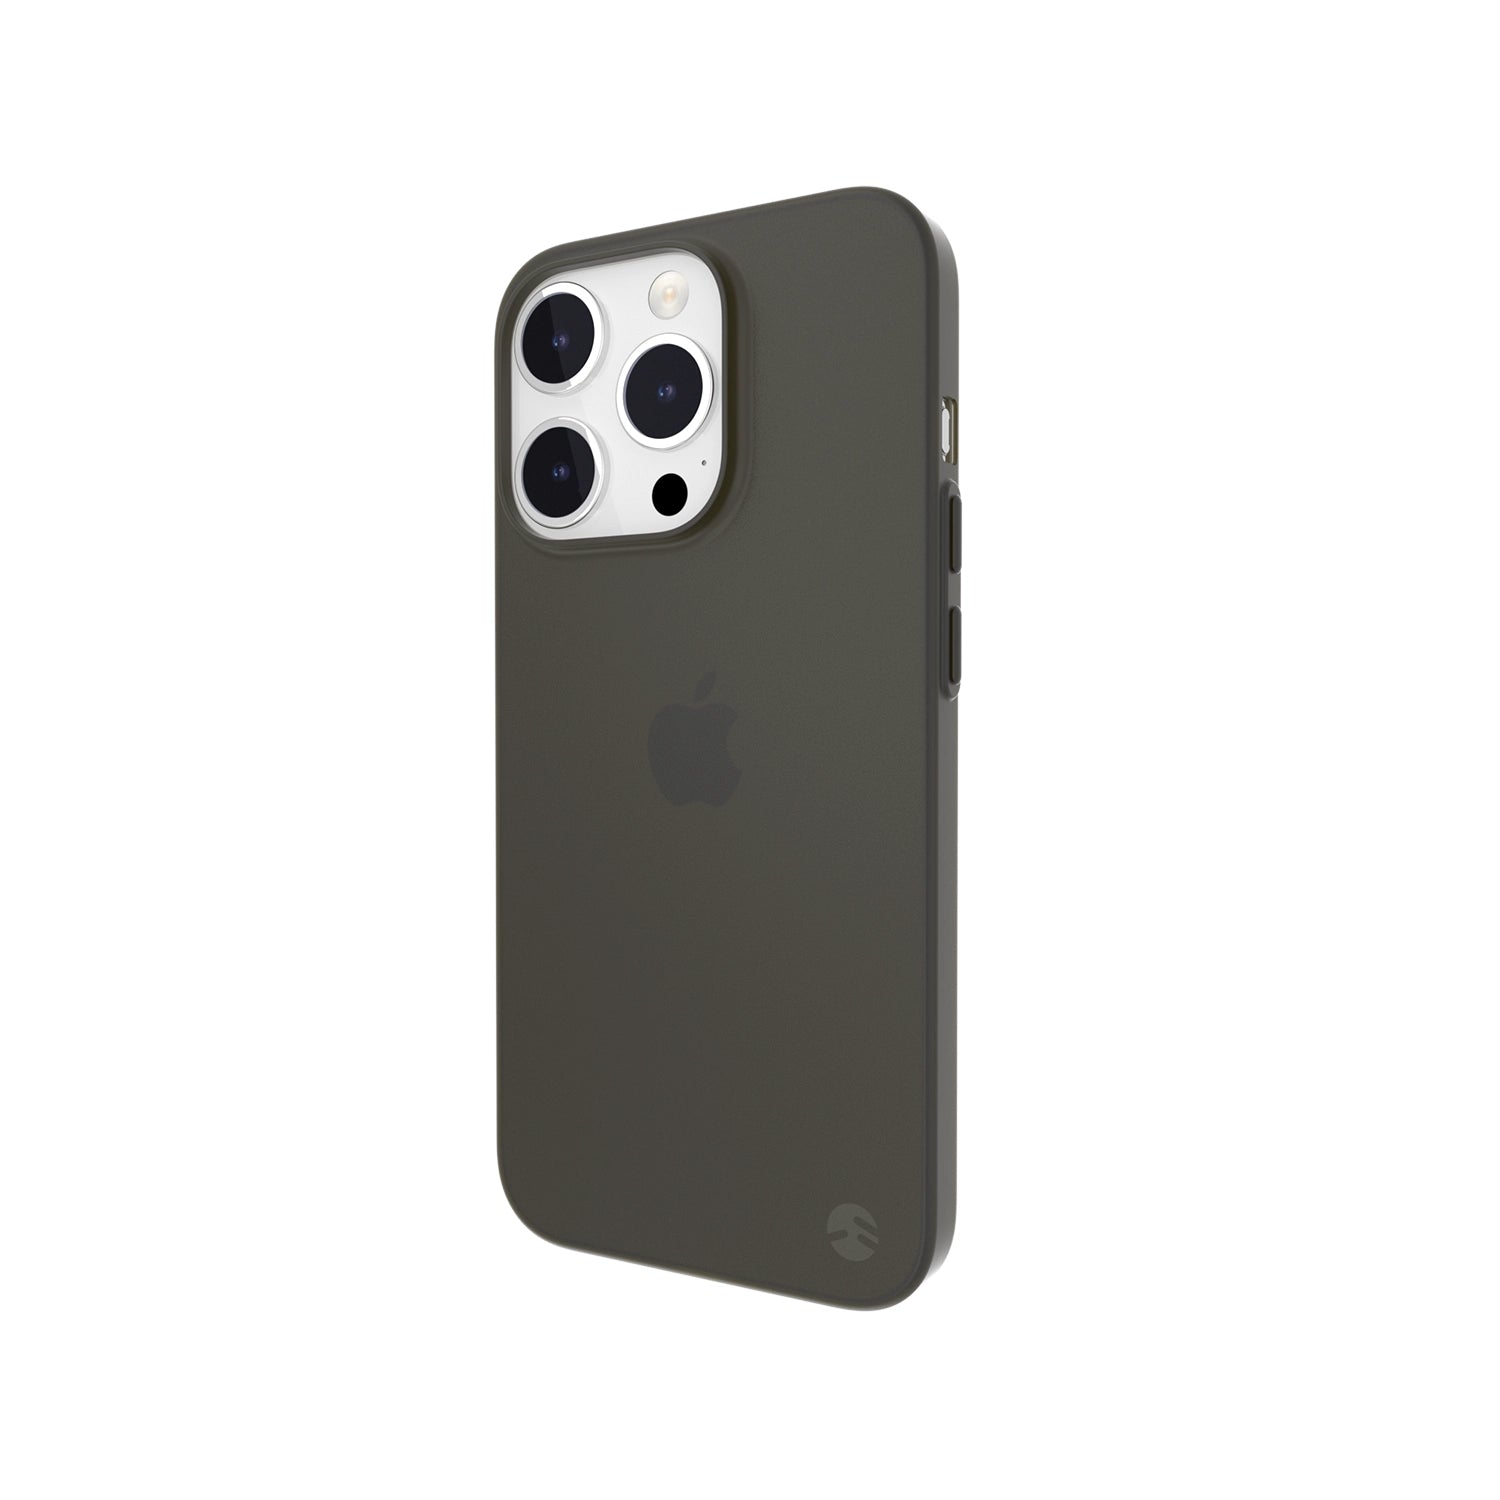 Synthesis | Sleek, Rugged iPhone 12 Pro Case Stealth Black from Caudabe